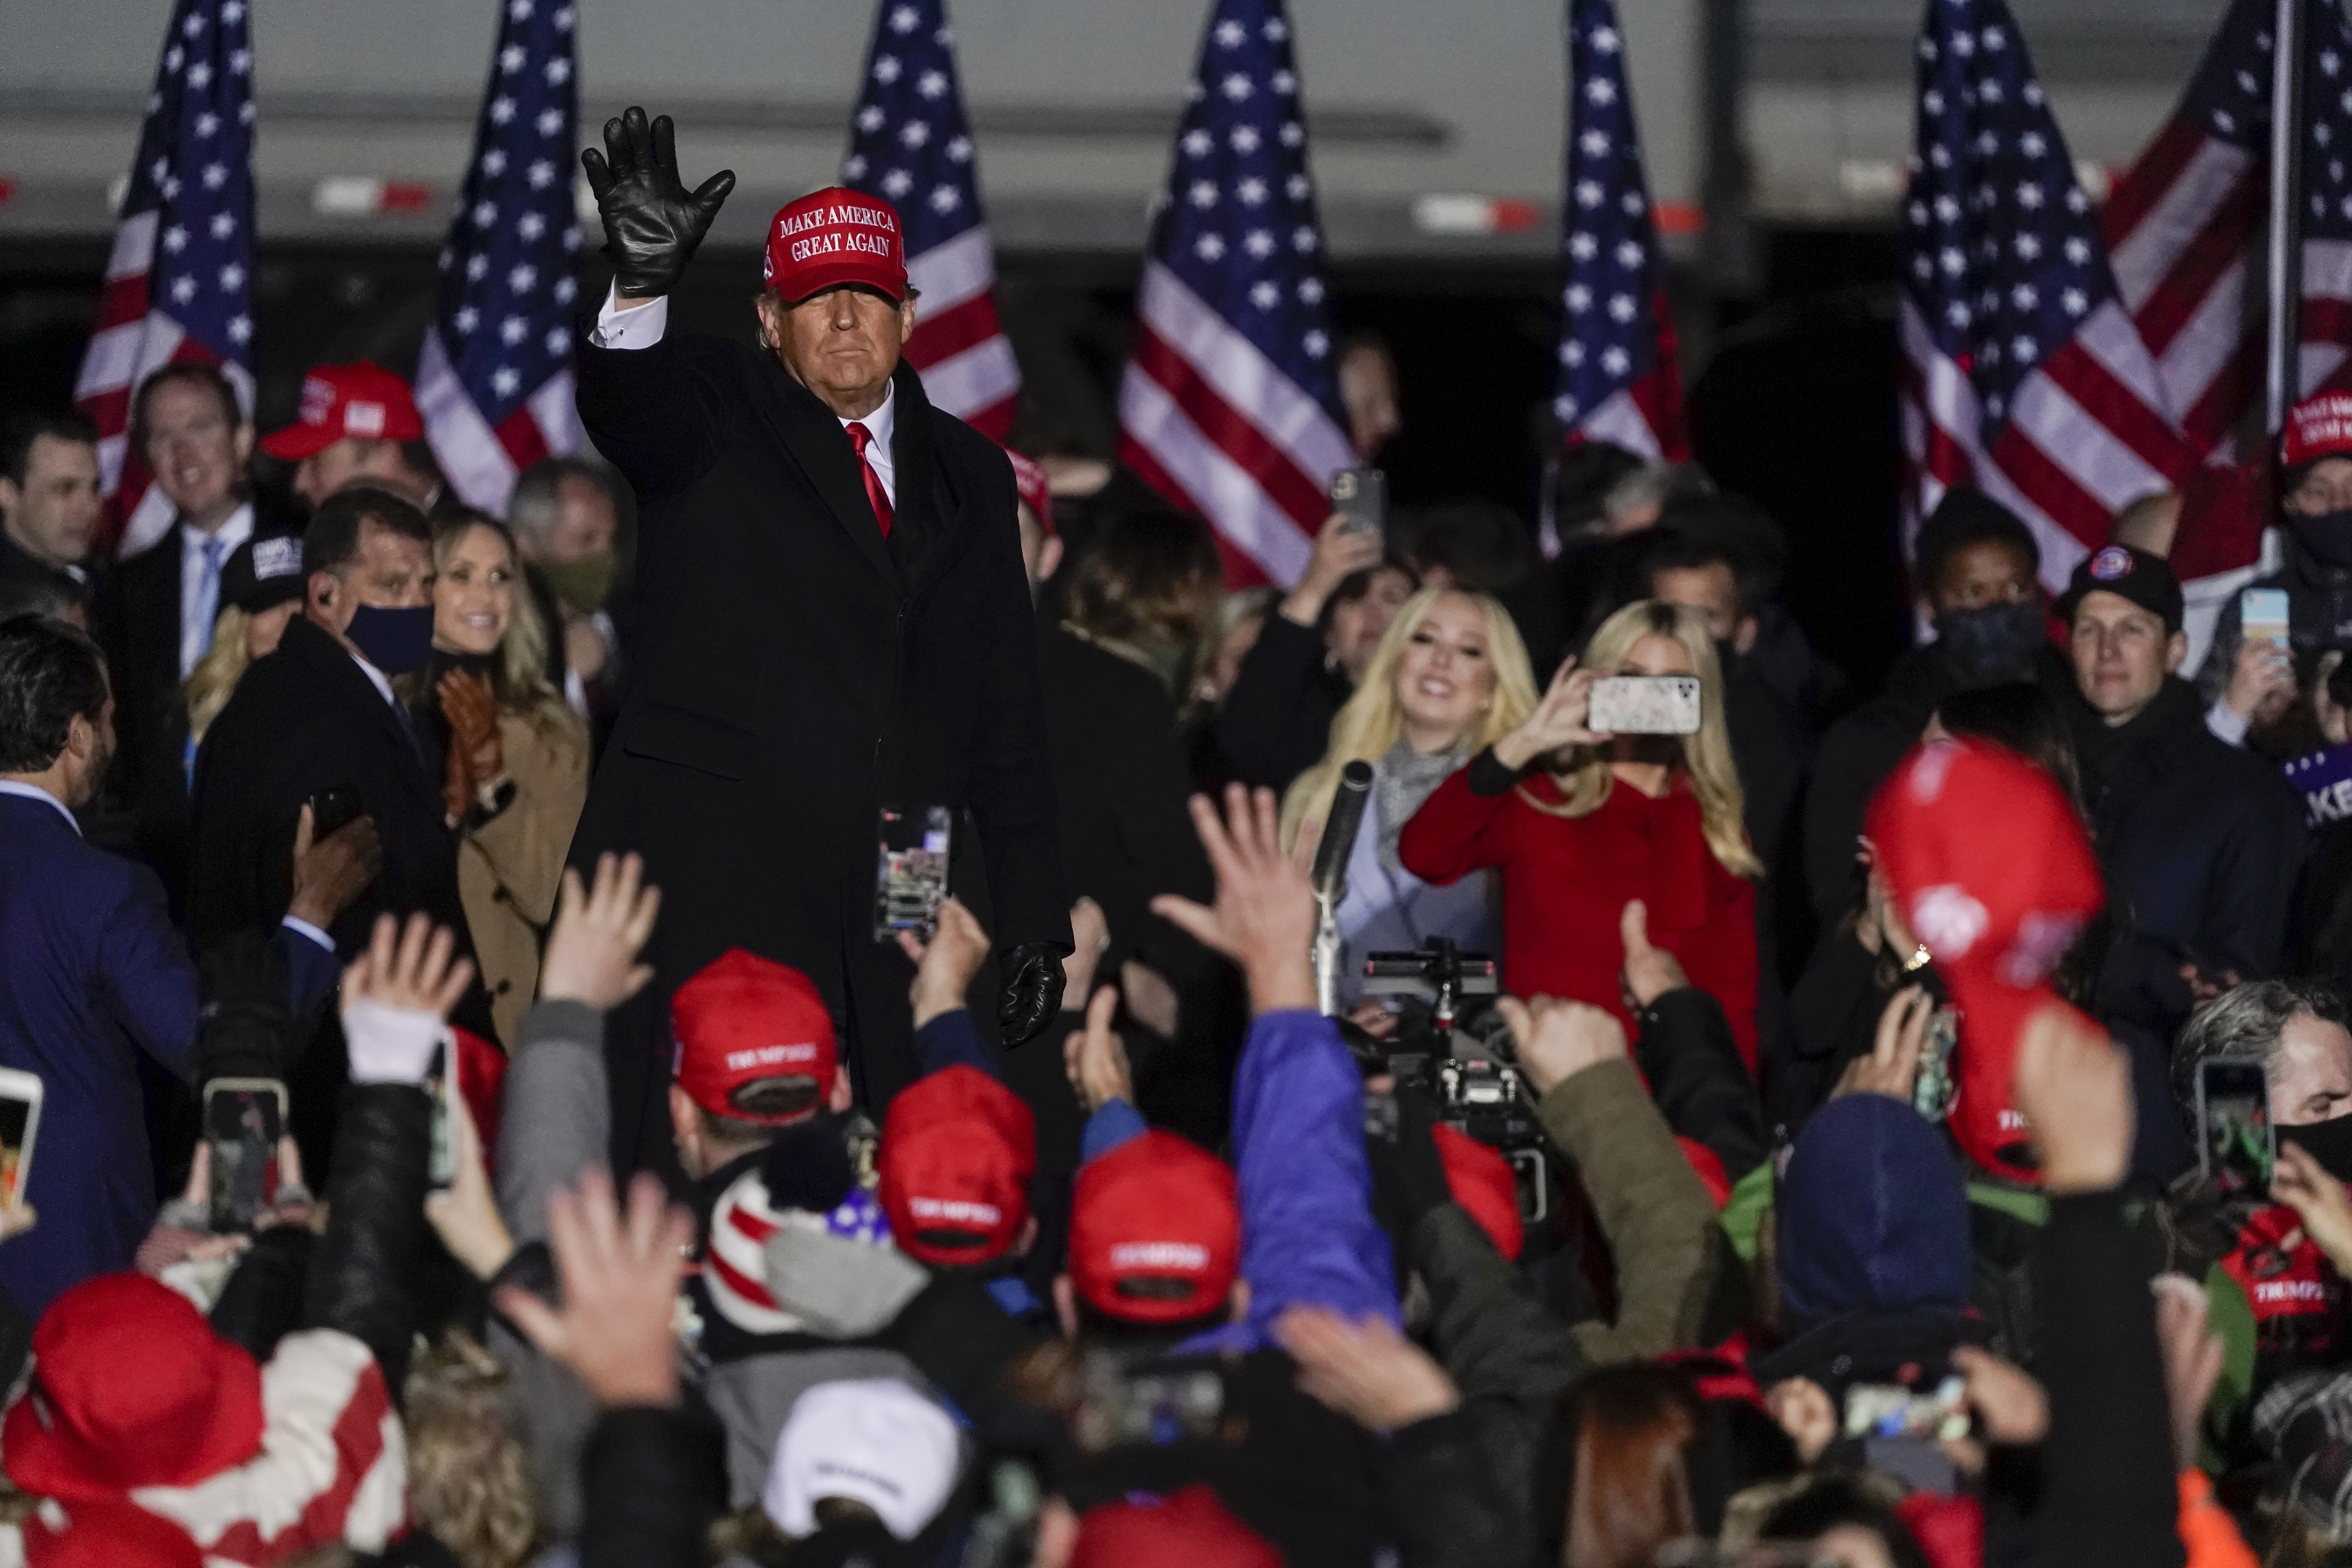 Then-President Donald Trump waves to a crowd at a campaign event the day before the 2020 election.